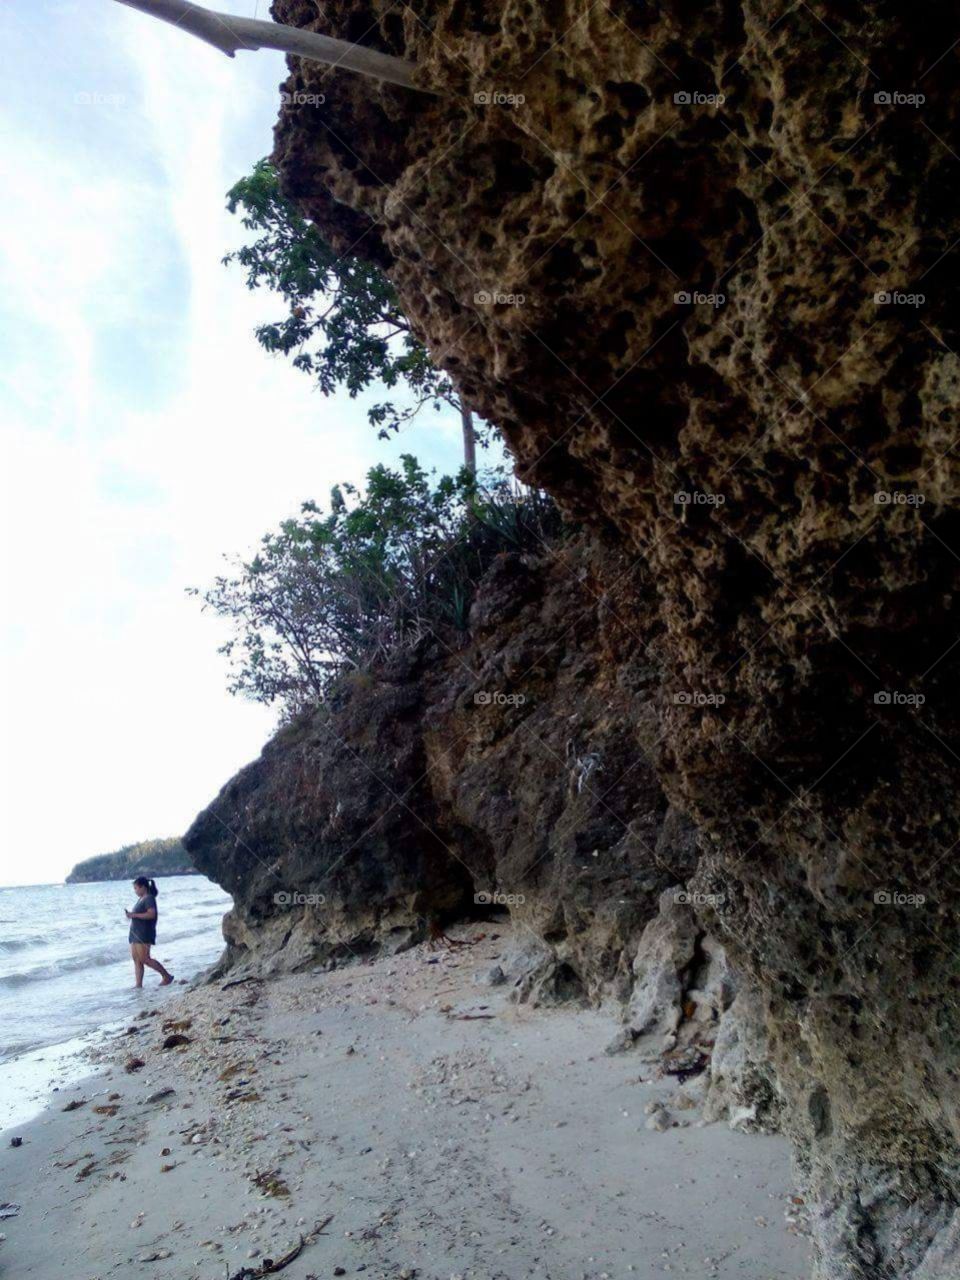 White/yellow sand seaside, tiny rocks and pebbles, shells and more. Sea banks and trees around. Feel the nature, Bogo Maria Siquijor Philippines.